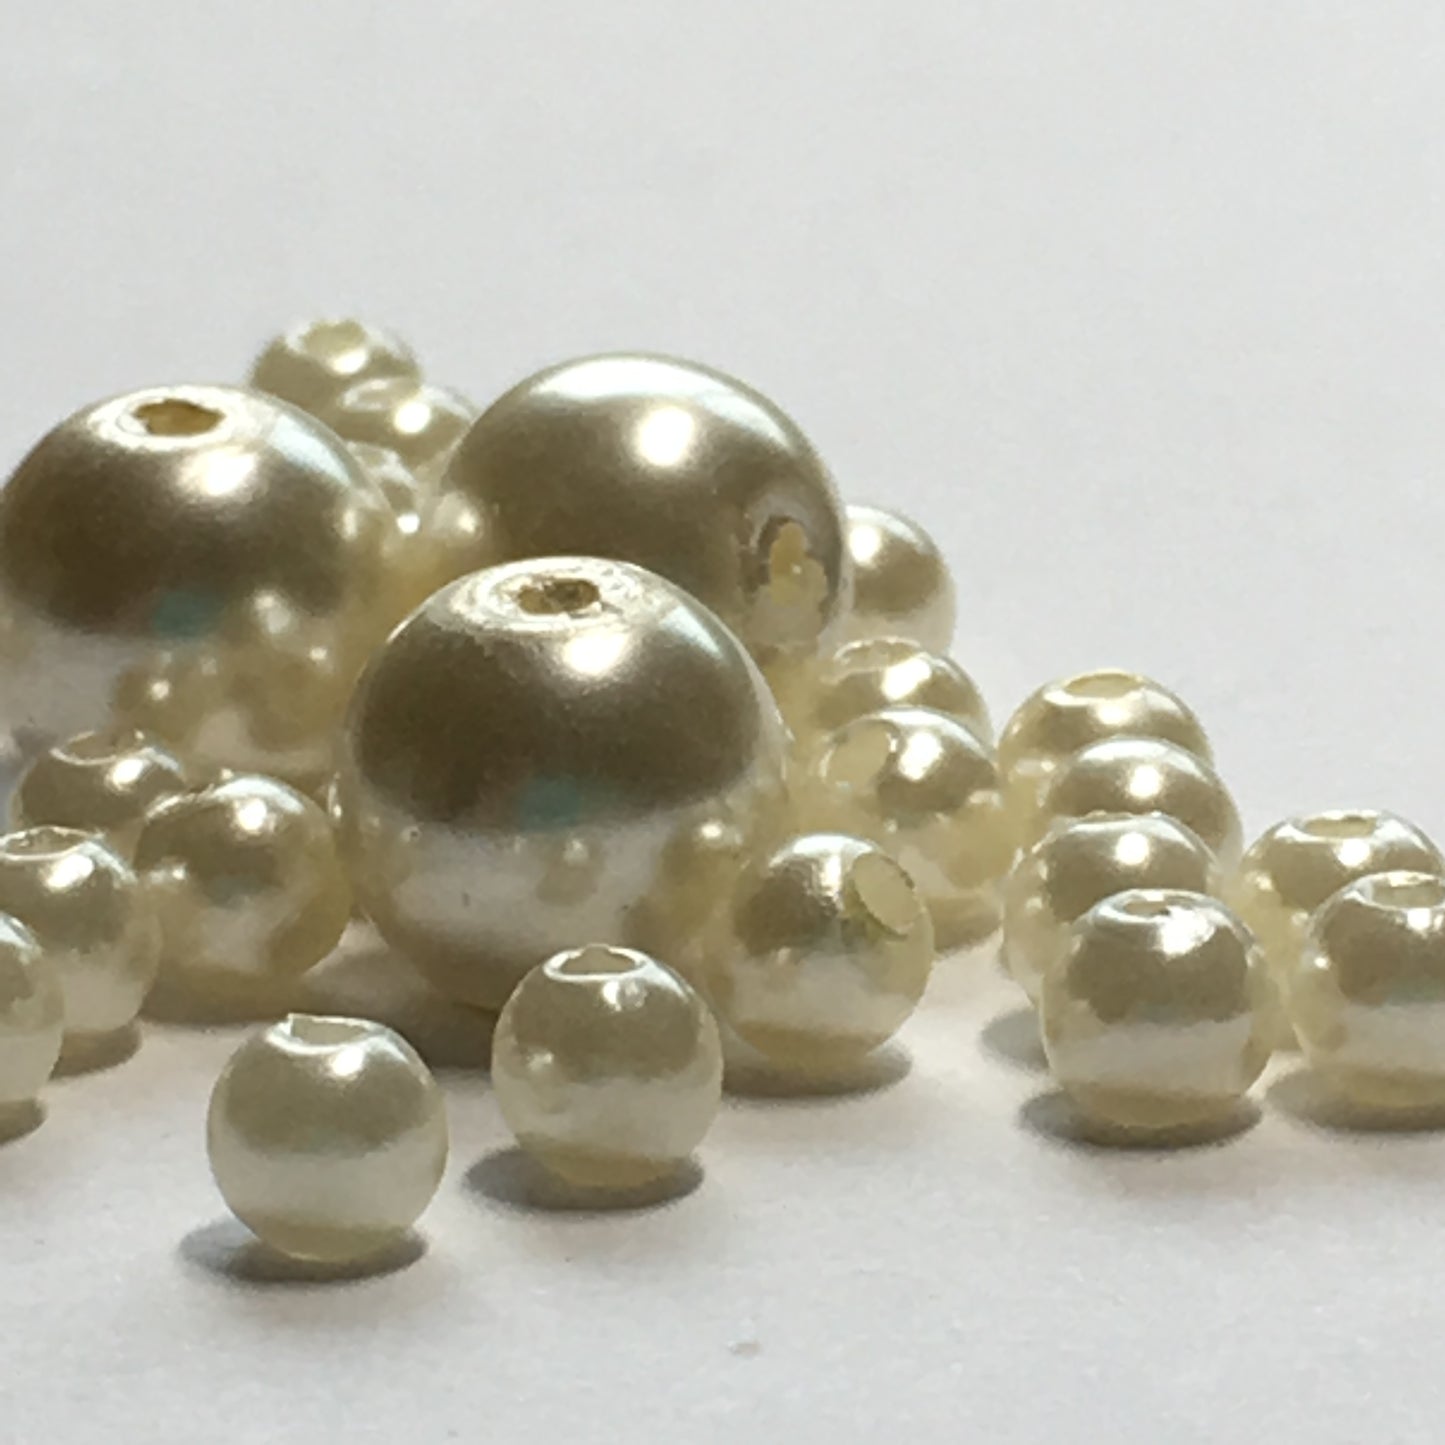 White Pearl Acrylic Round Beads, 4 & 7 mm - 41 Beads